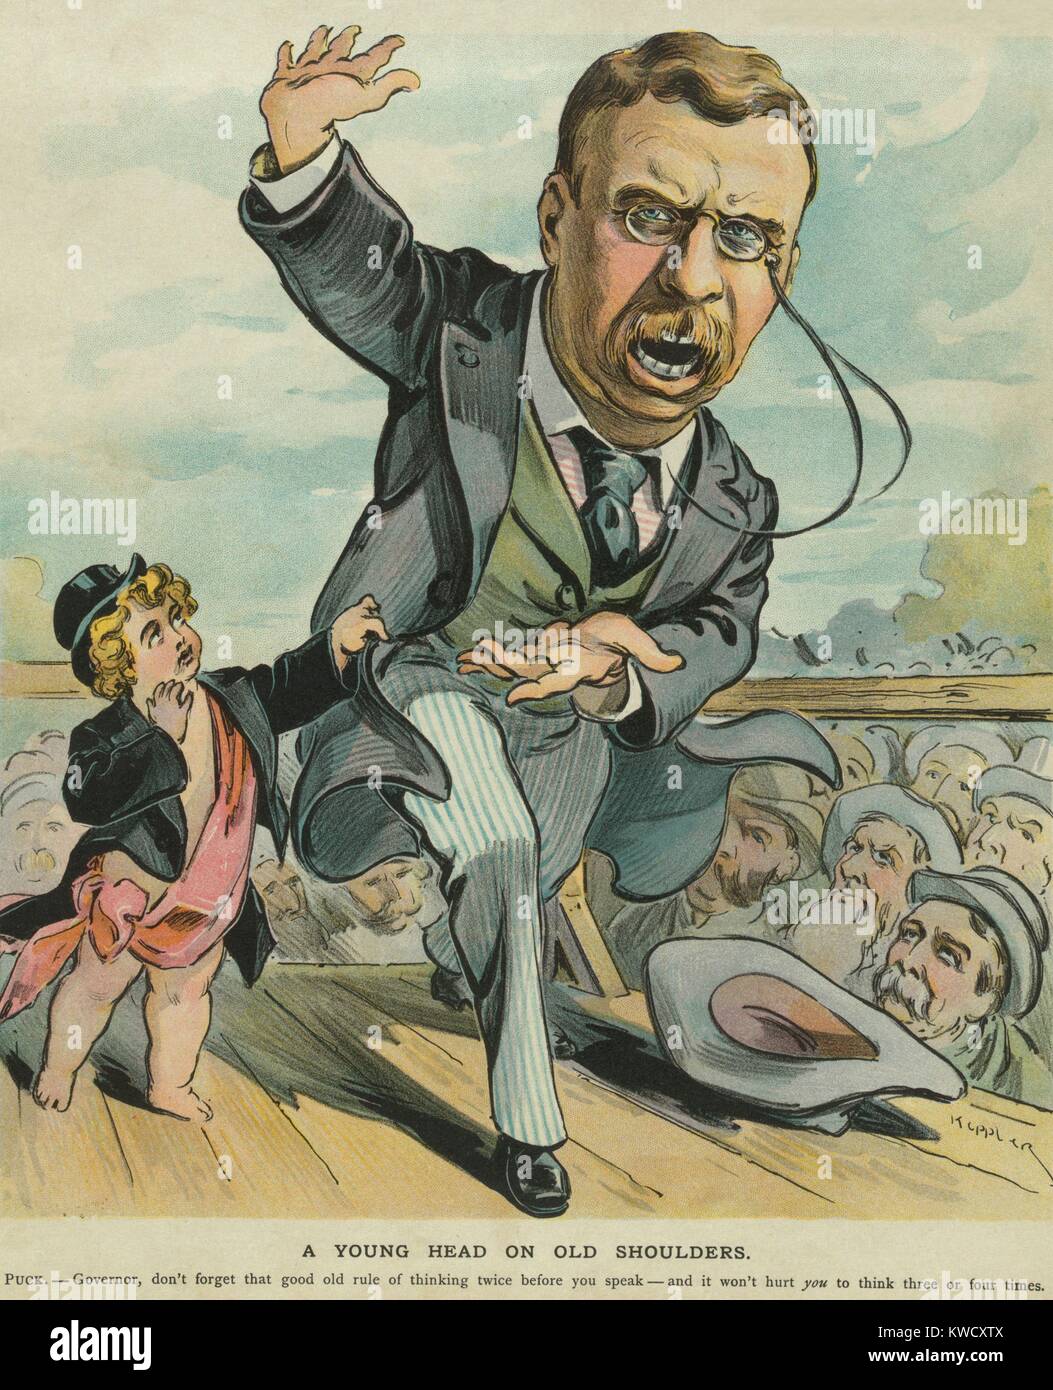 Cartoon of NY Governor Theodore Roosevelt speaking with animation but not restraint. Puck Magazine, Nov. 1, 1899. Puck pulls at his coat to advise he think before speaking (BSLOC_2017_4_27) Stock Photo